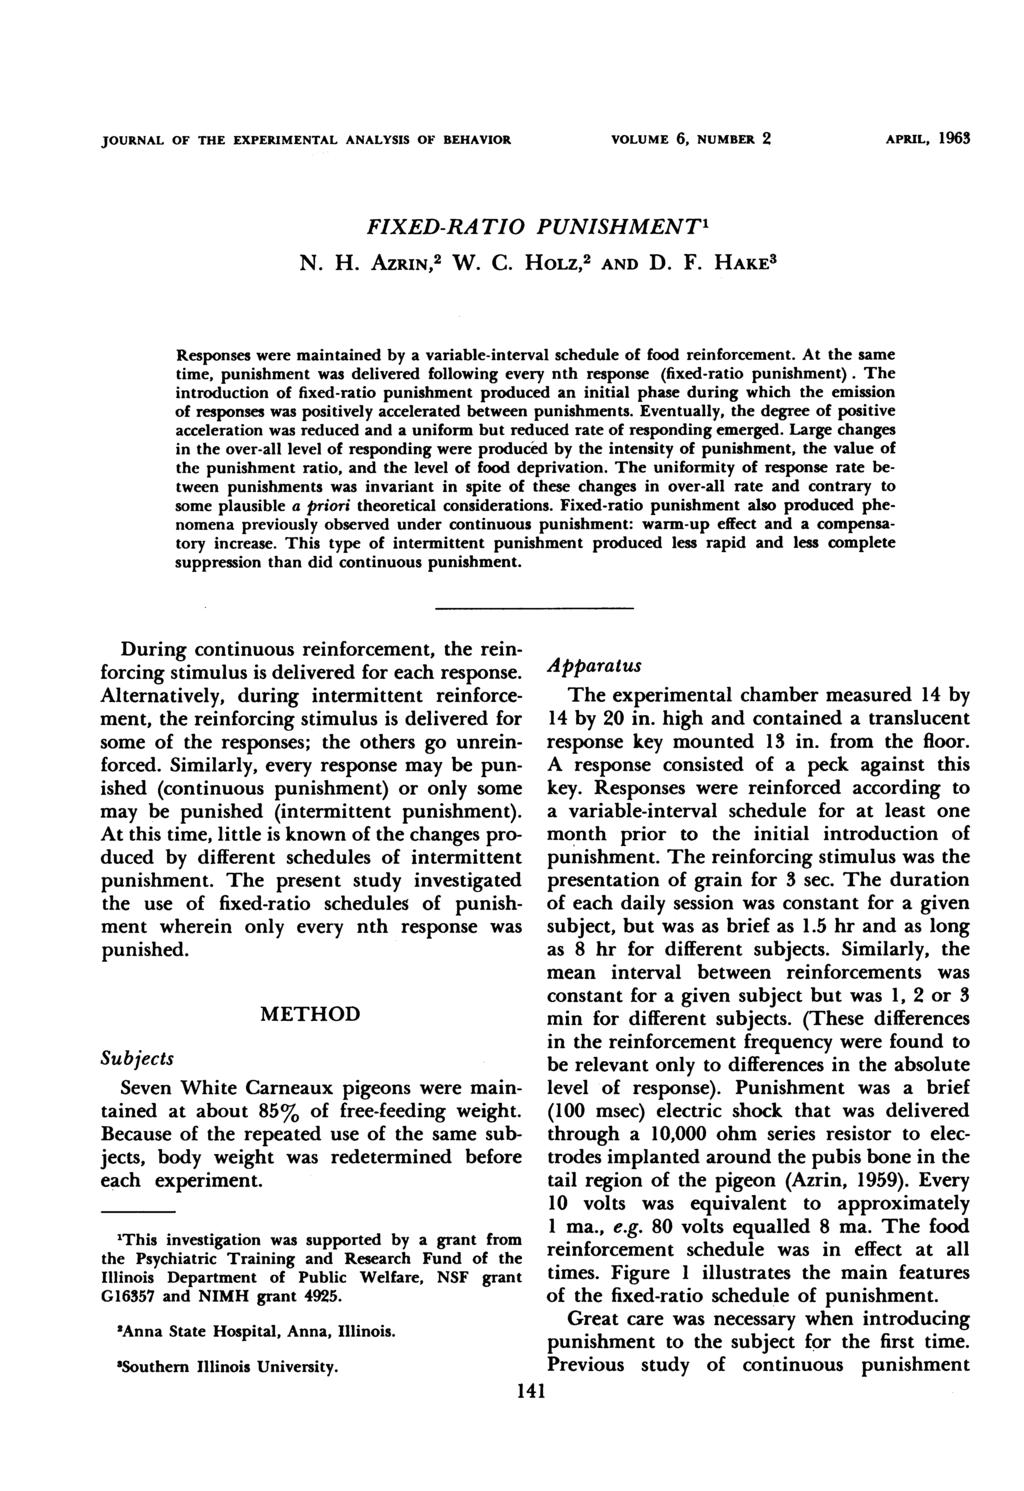 JOURNAL OF THE EXPERIMENTAL ANALYSIS OF BEHAVIOR VOLUME 6, NUMBER 2 APRIL, 1963 FIXED-RATIO PUNISHMENT1 N. H. AZRIN,2 W. C. HOLZ,2 AND D. F. HAKE3 Responses were maintained by a variable-interval schedule of food reinforcement.